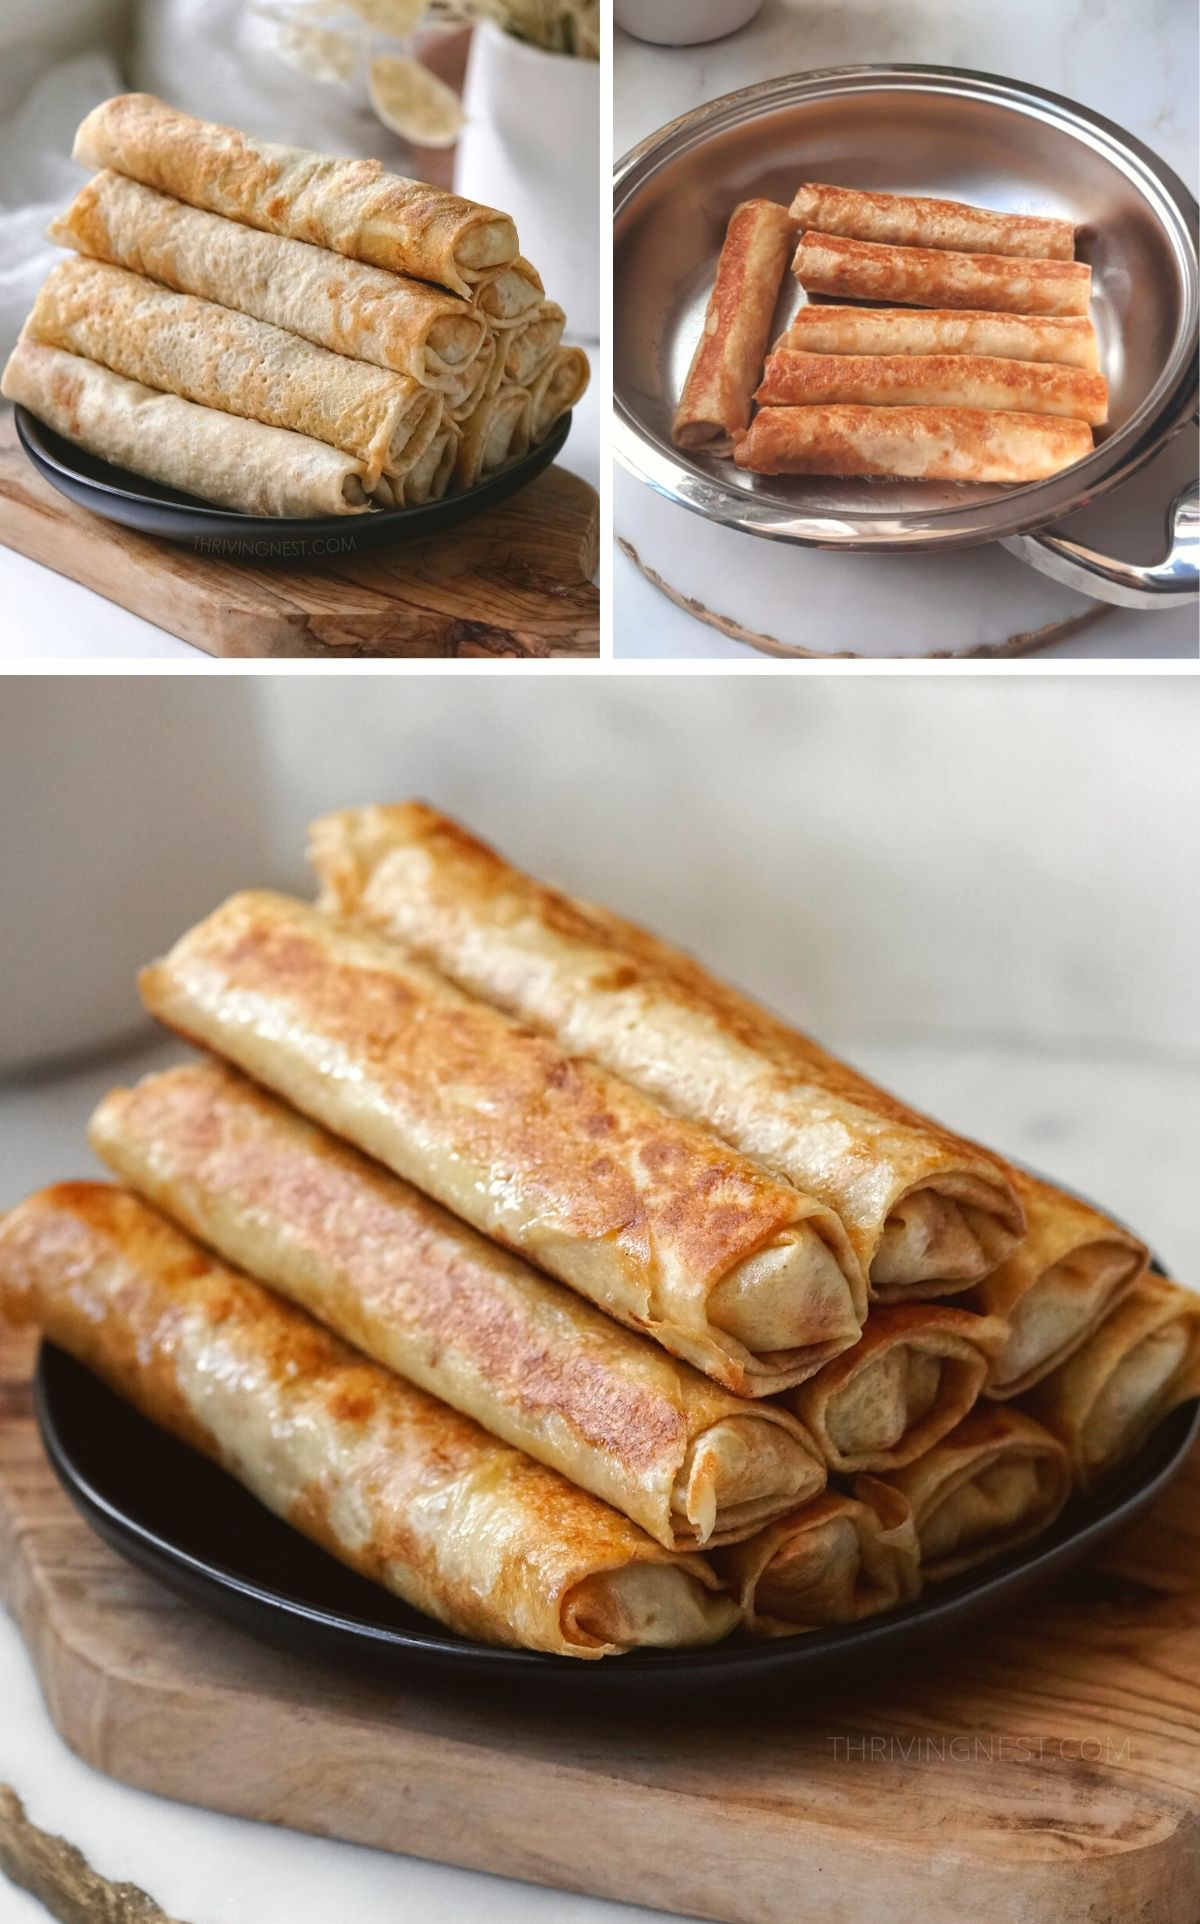 Process shots showing how to sear the crepe roll ups in the pan after rolling.